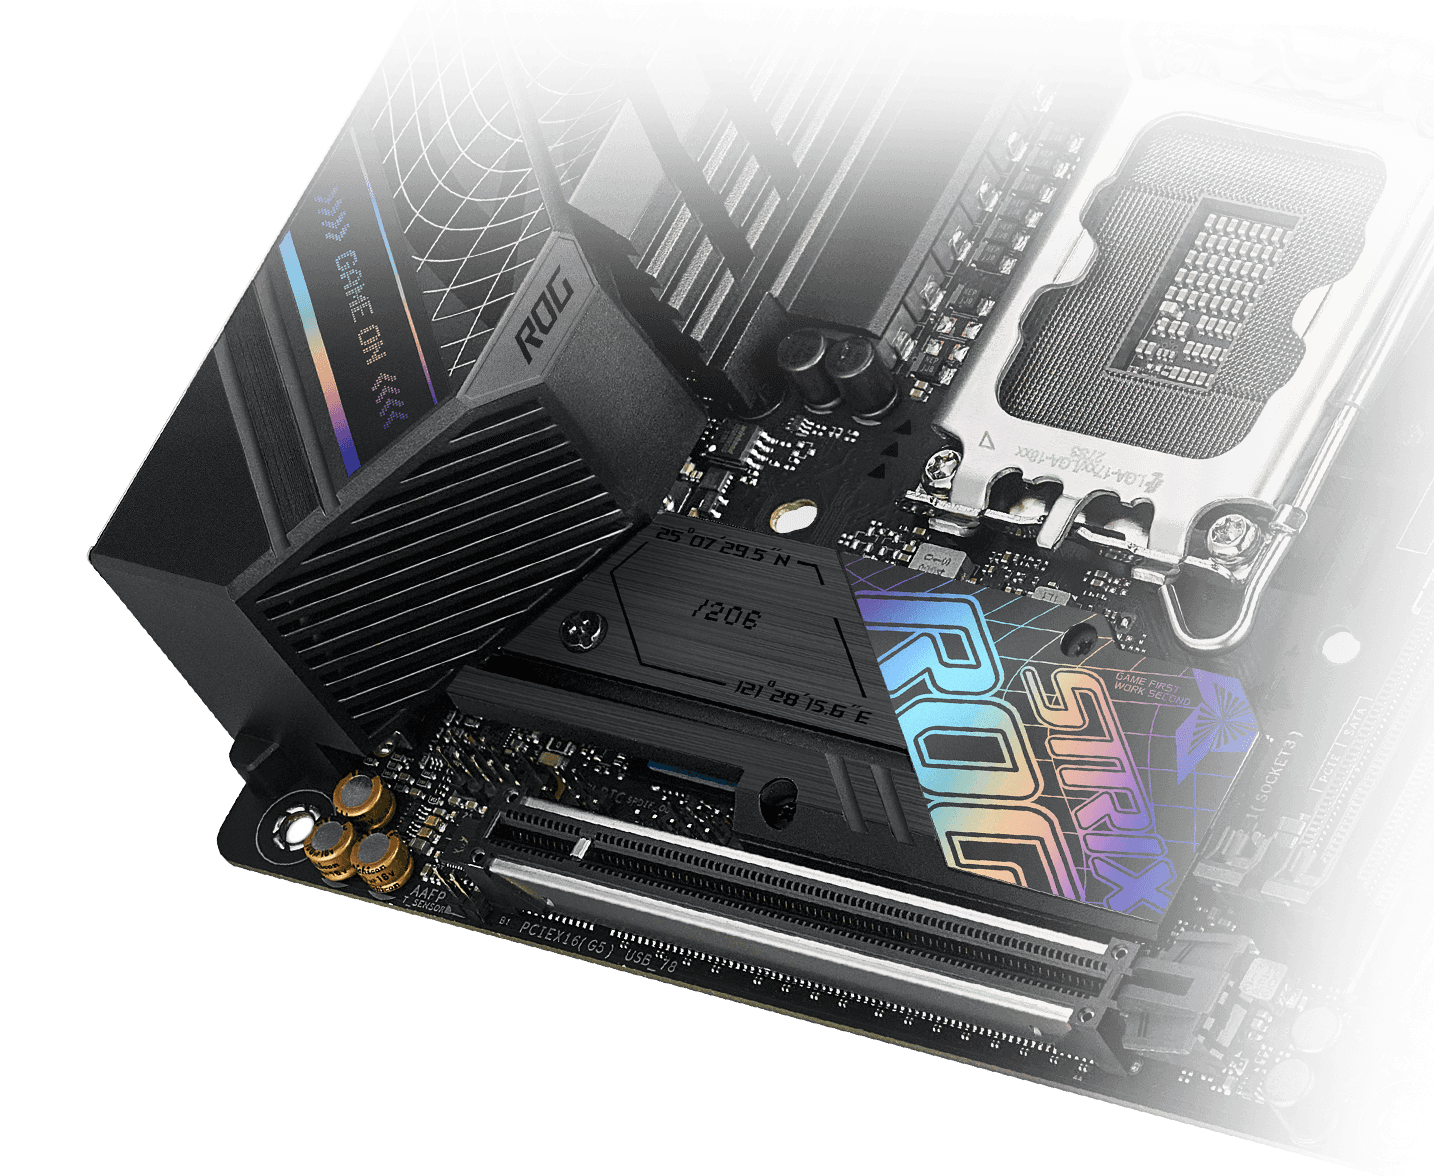 The Strix B760-I motherboard features SupremeFX audio.